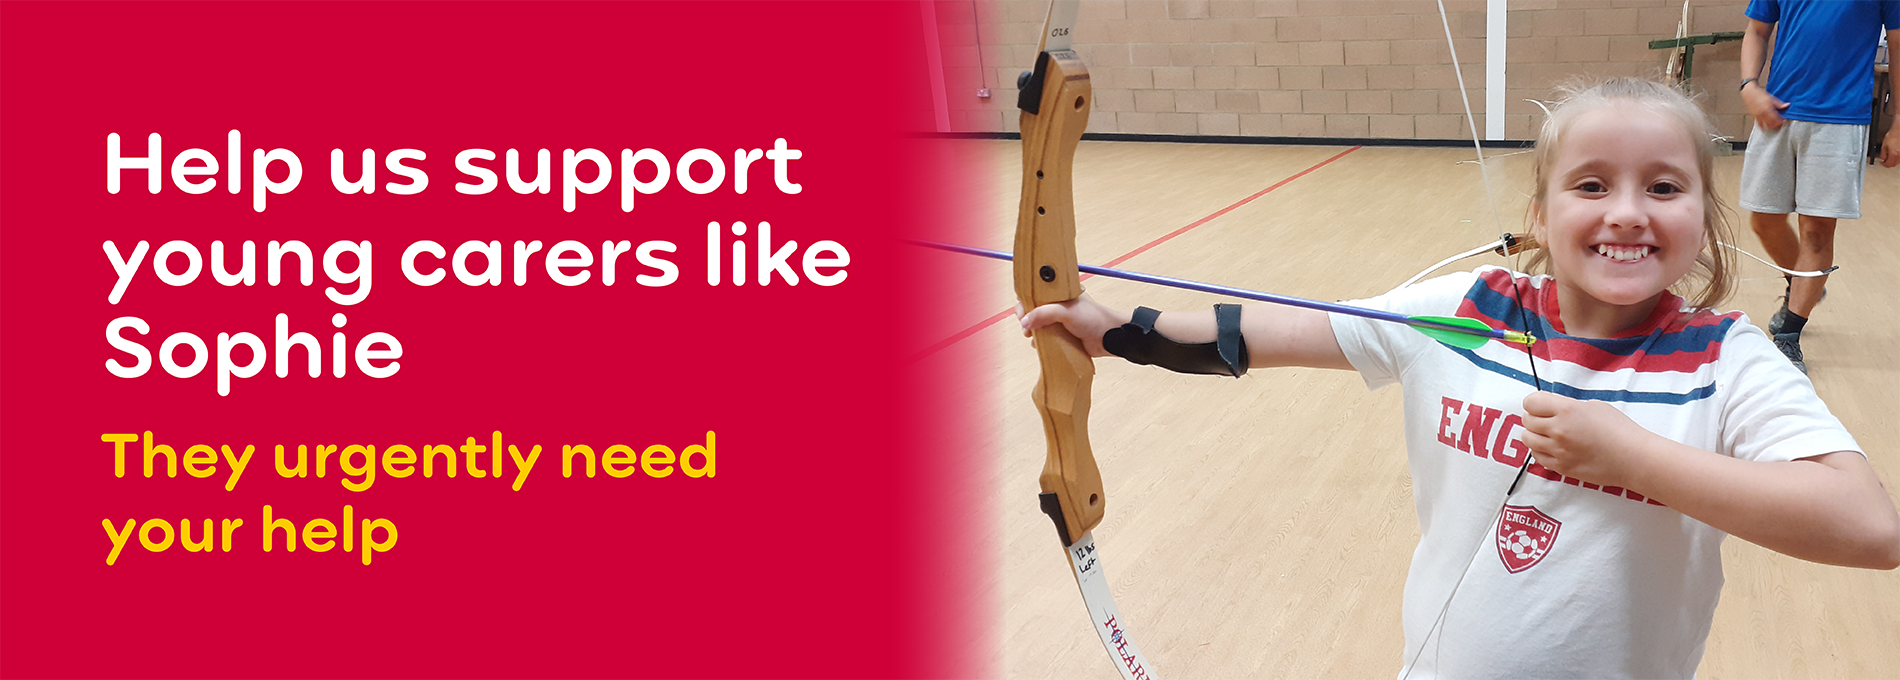 Help us support young carers like Sophie